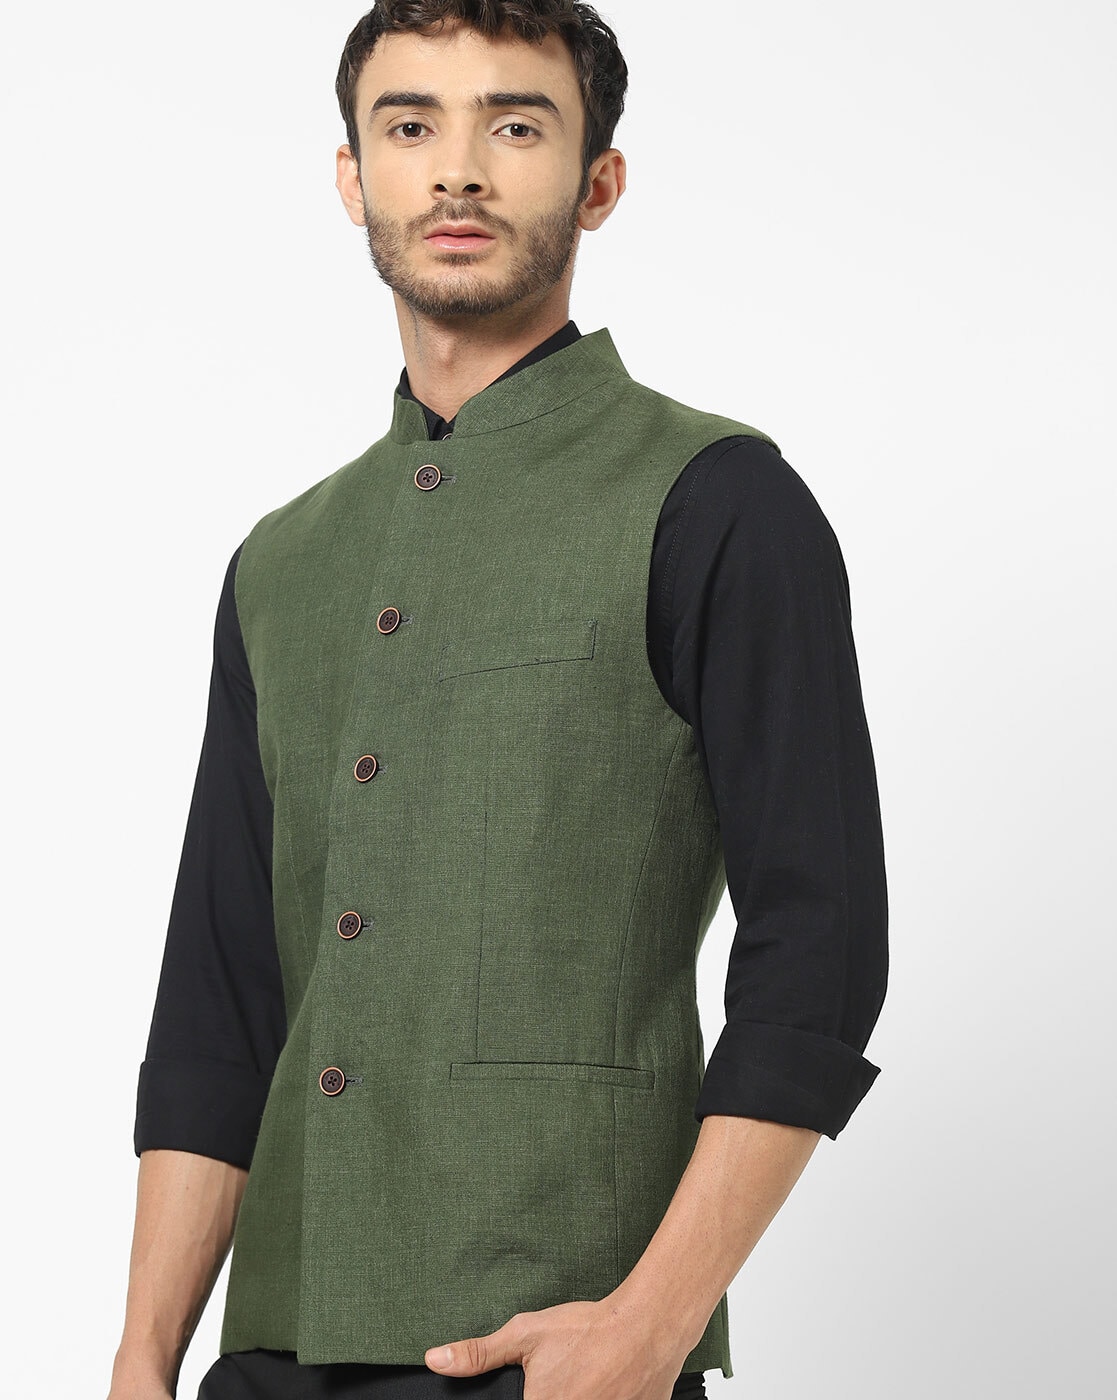 Buy Reversible Green and Black Men Nehru Jacket Pure Cotton Handloom for  Best Price, Reviews, Free Shipping